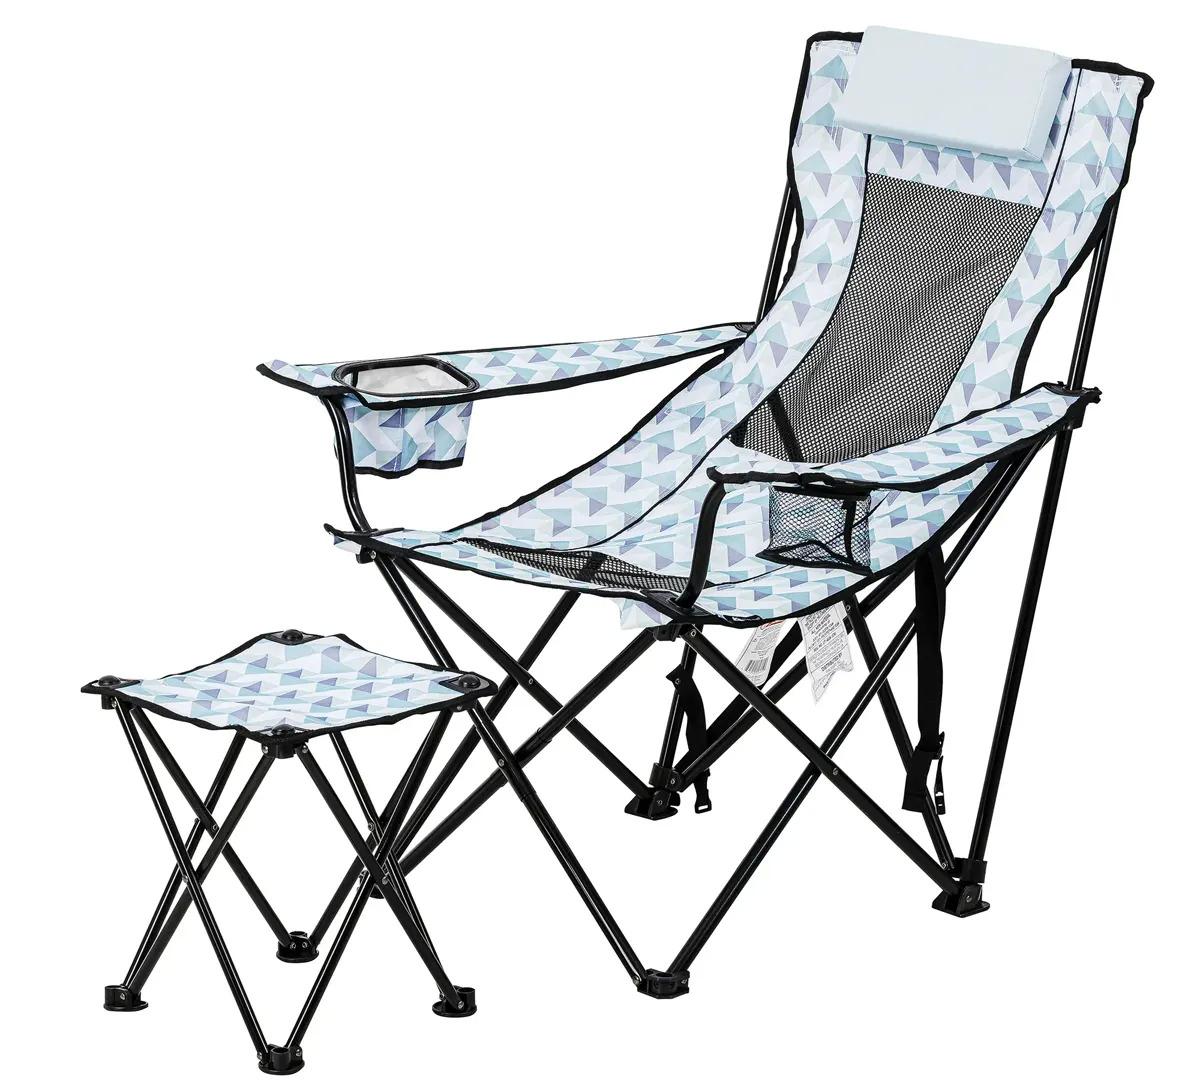 Ozark Trail Lounge Camp Chair for $17.50